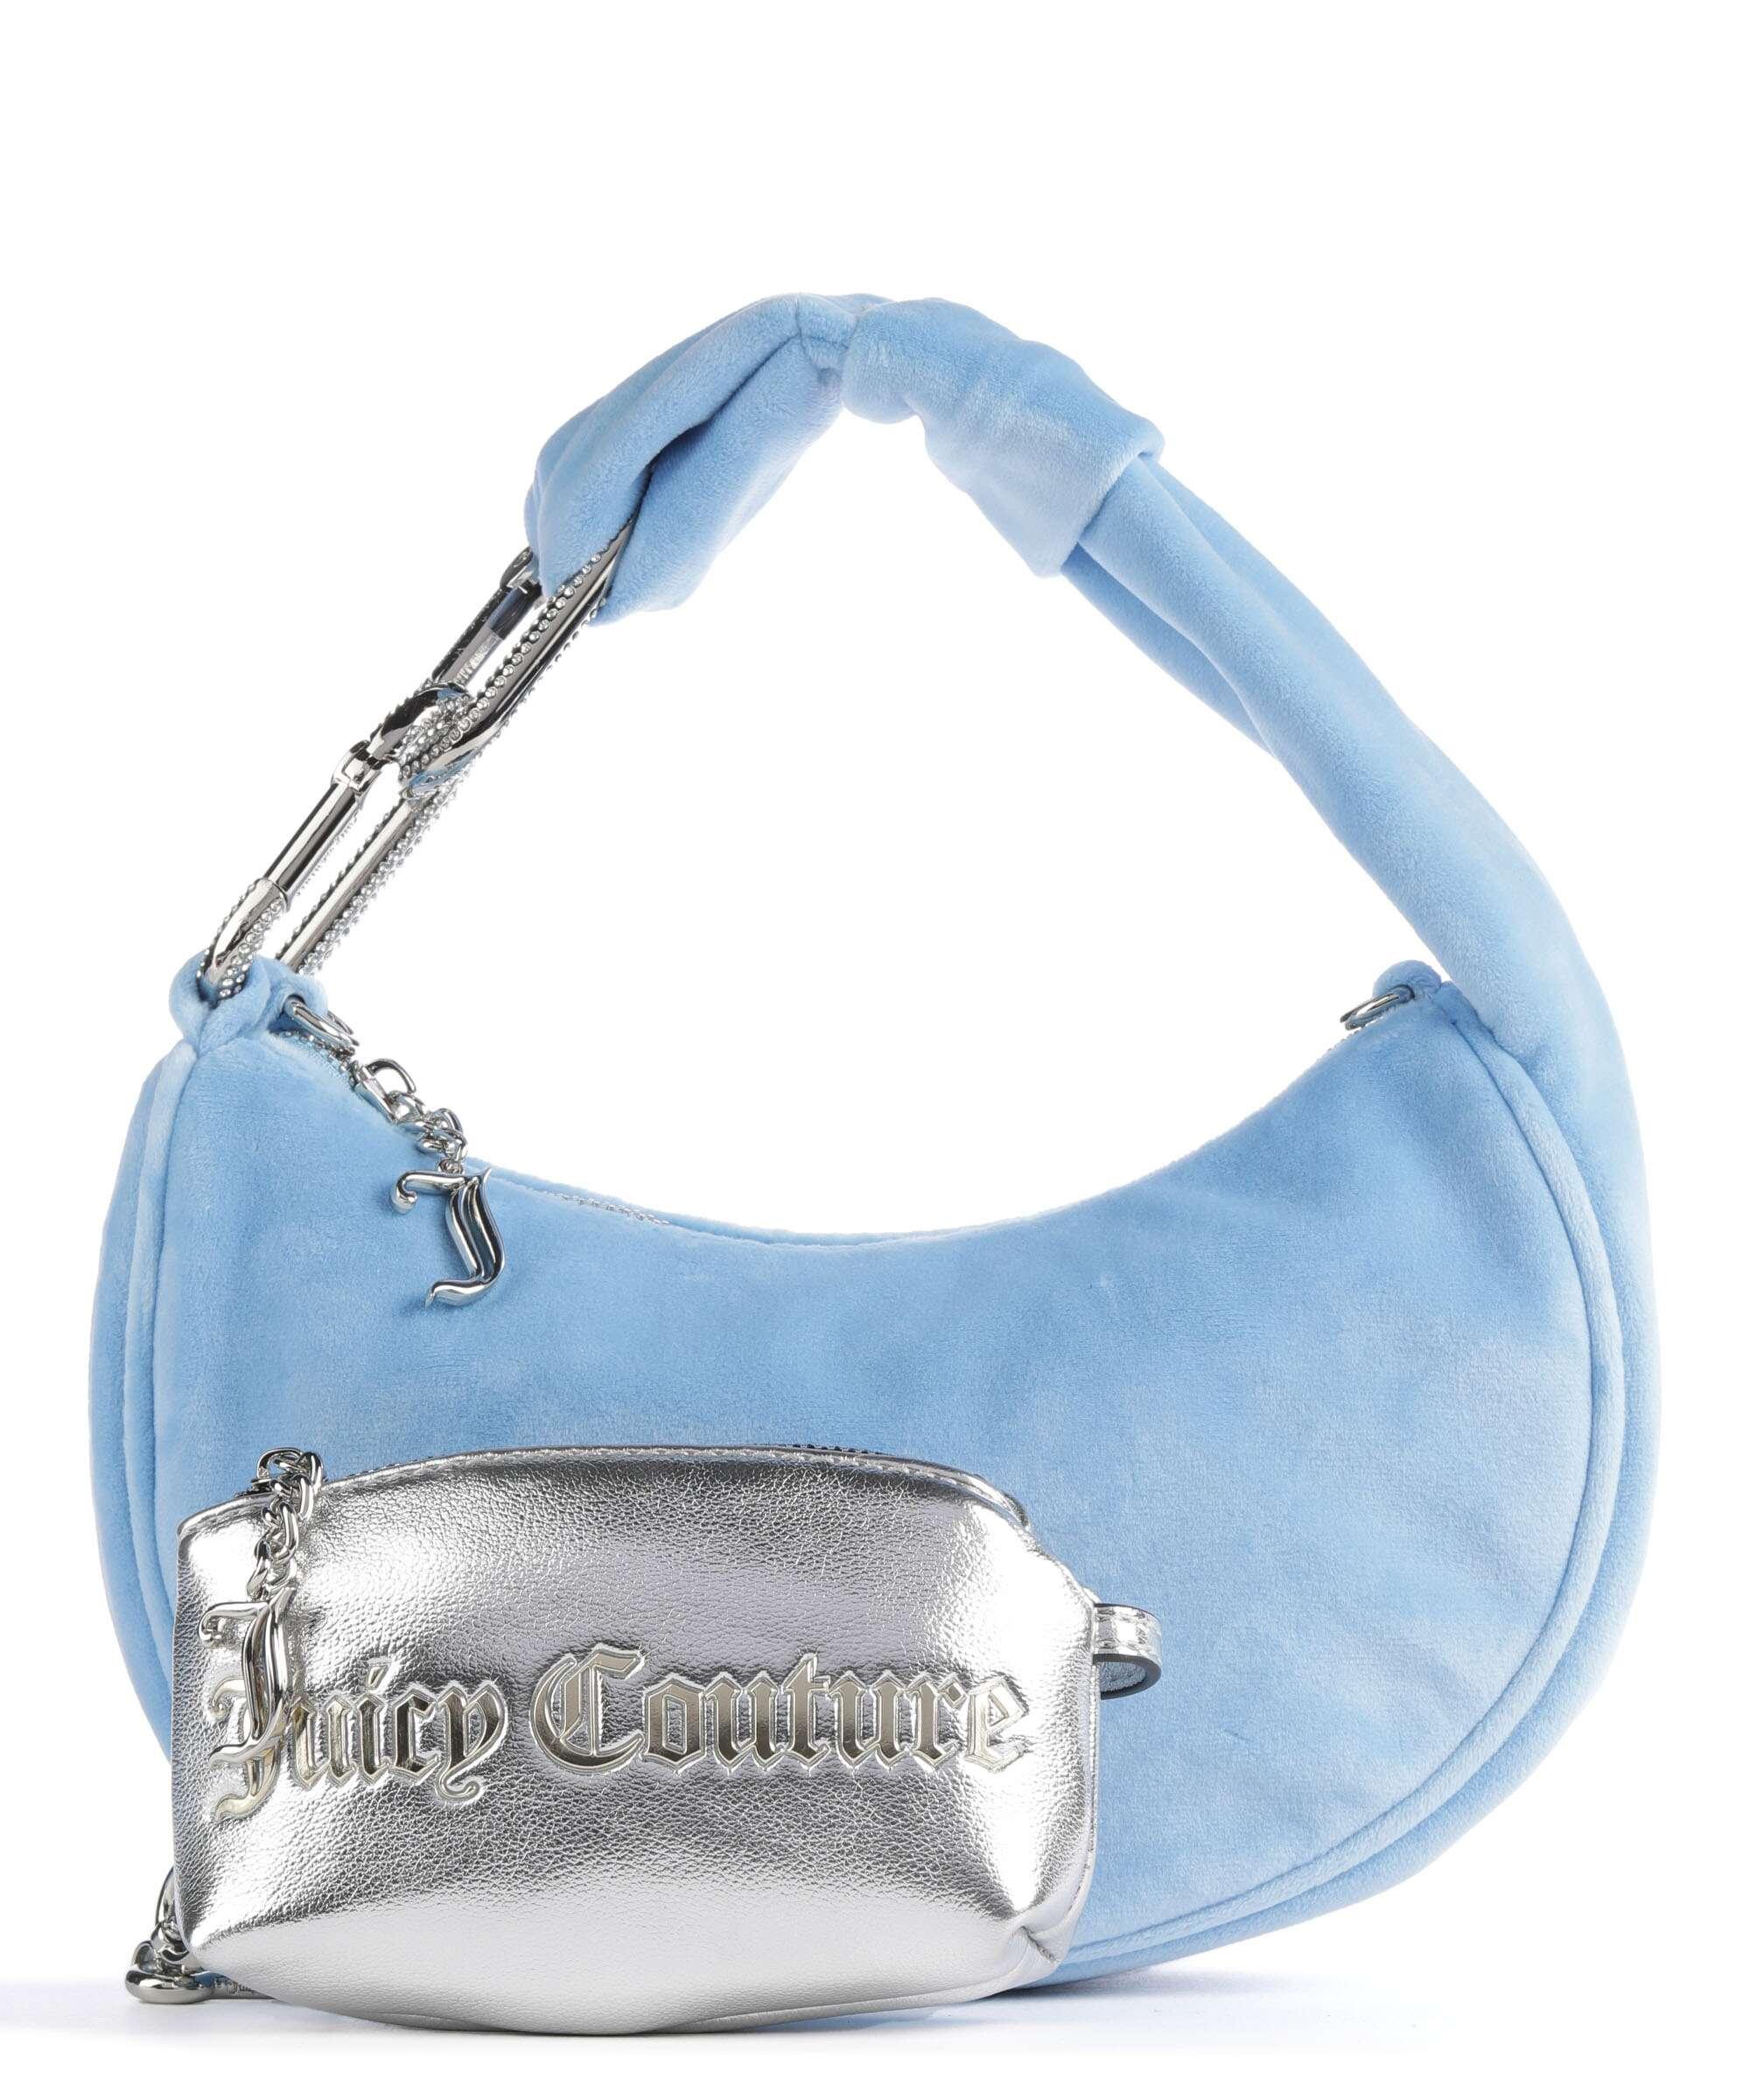 Juicy Couture | Bags | Juicy Couture Fluffy Blue Bag | Poshmark